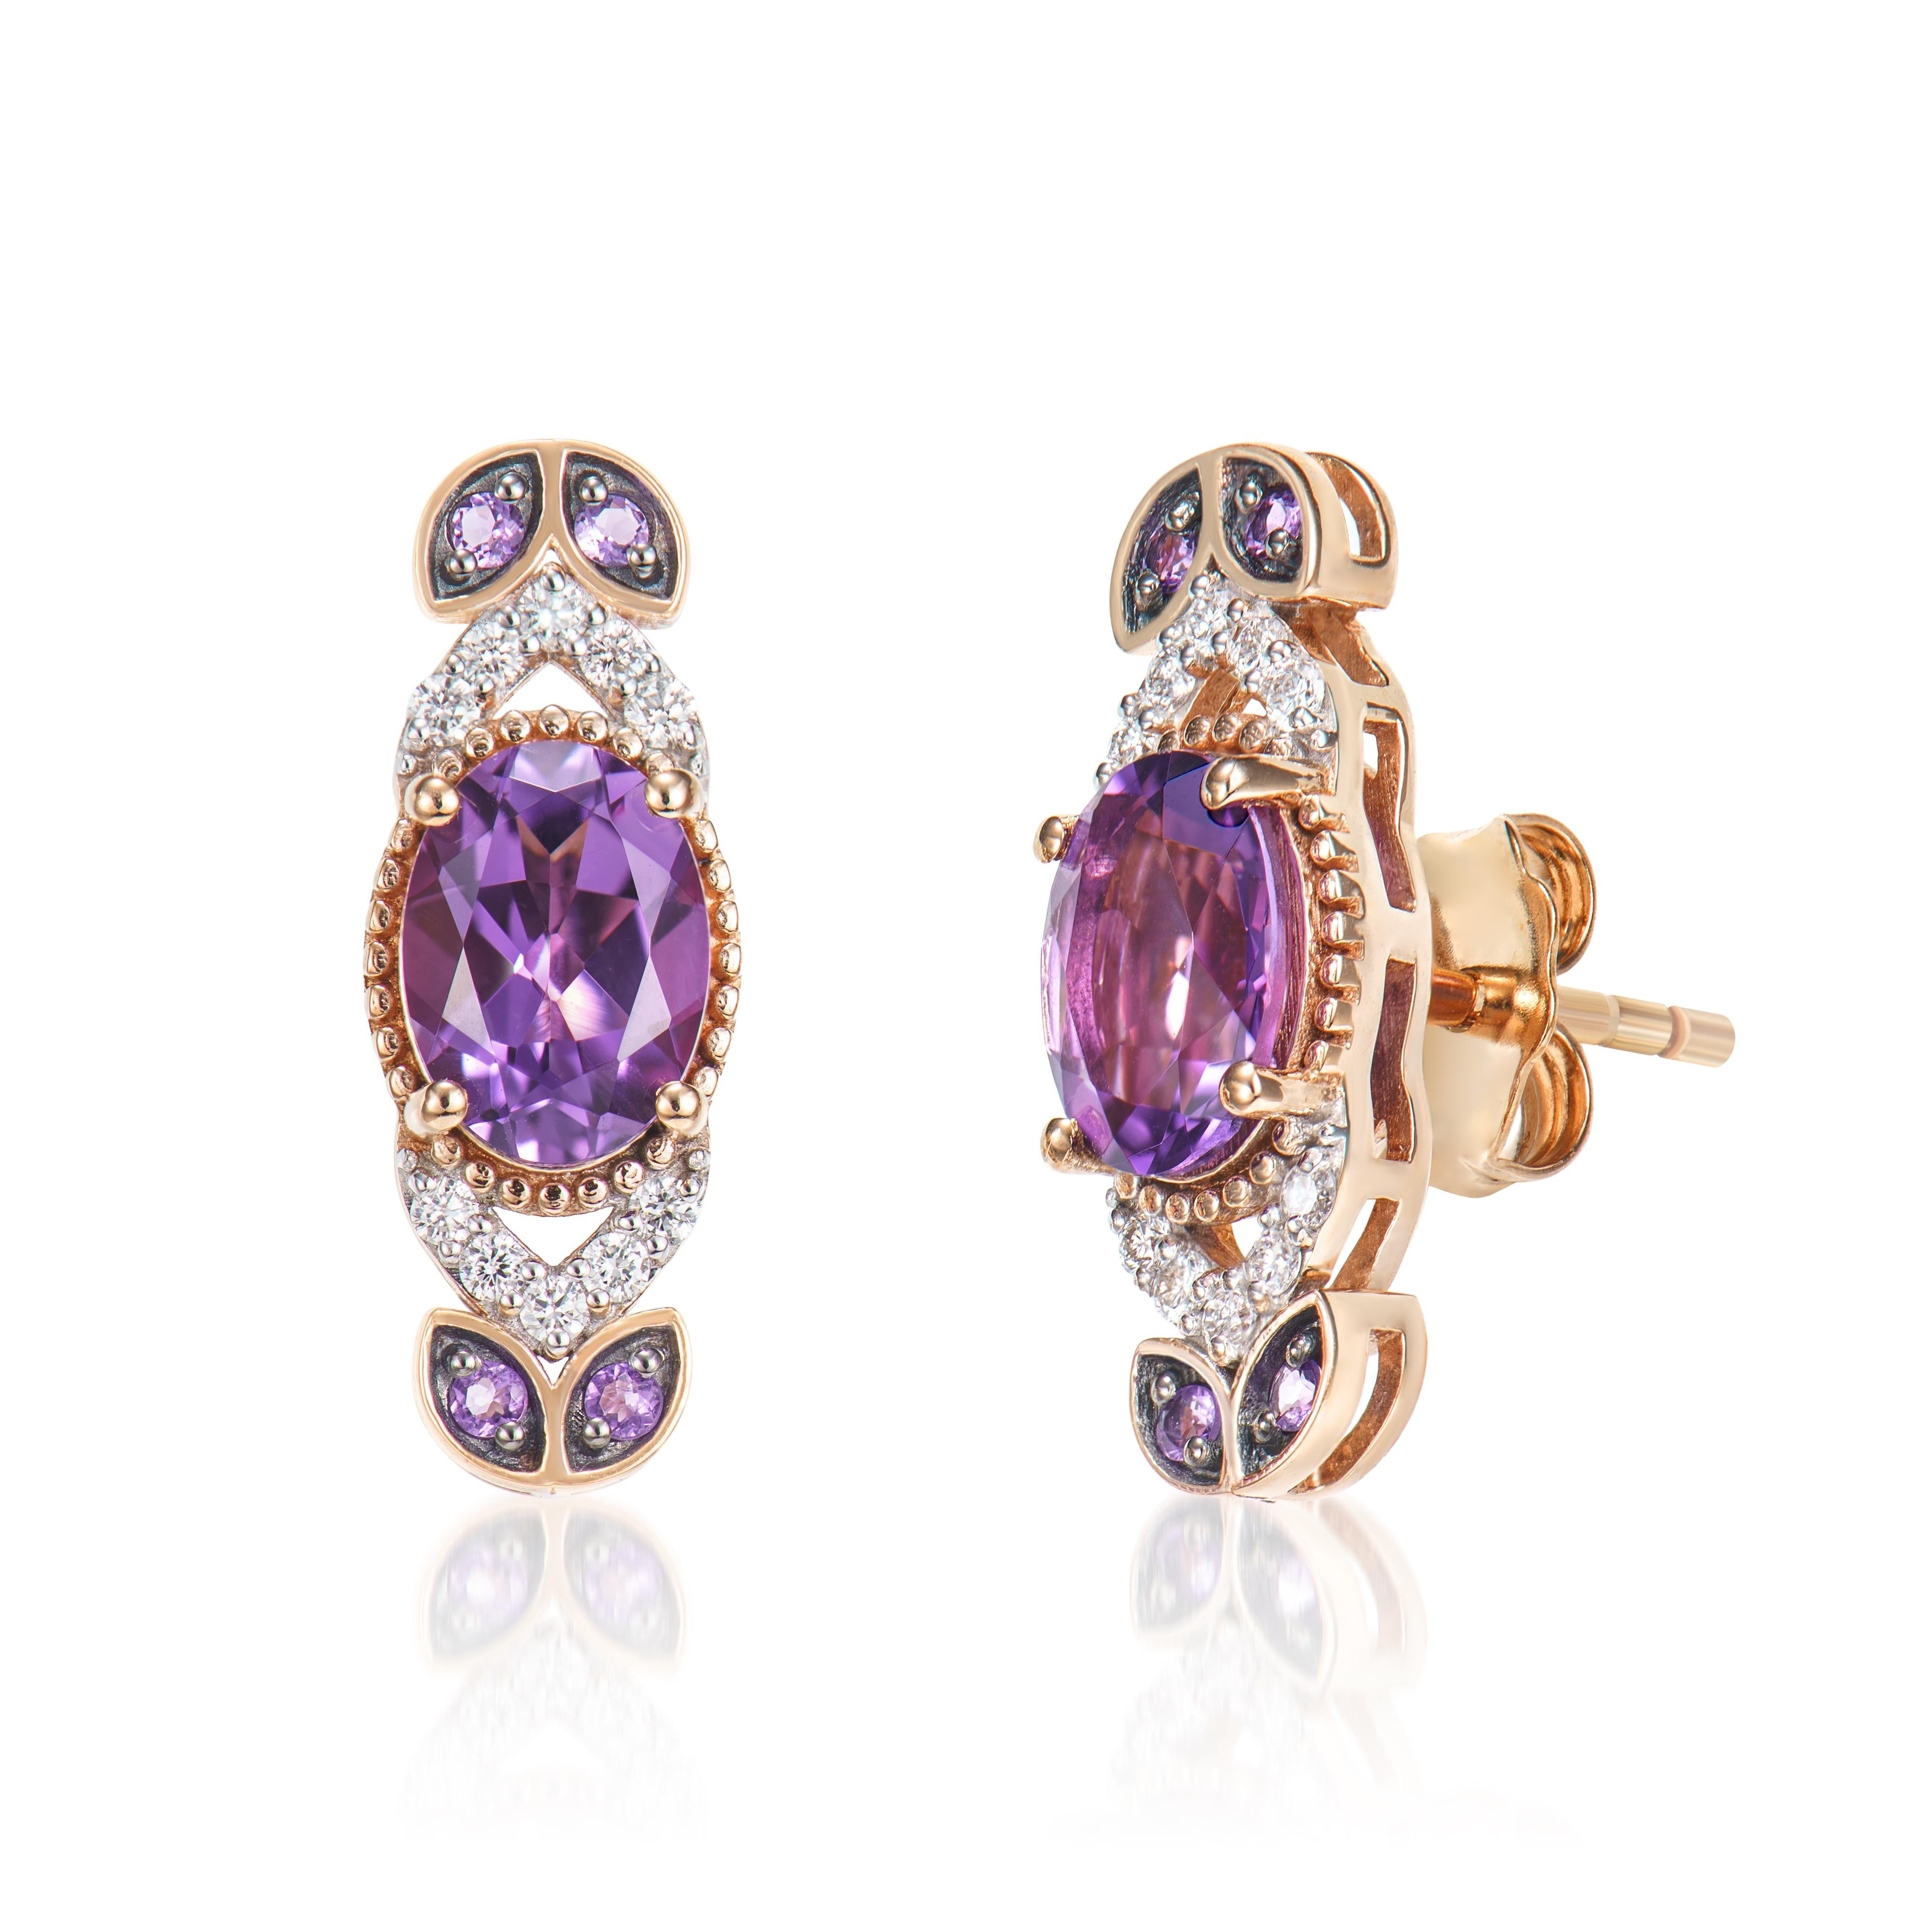 Contemporary 1.27 Carat Amethyst Stud Earrings in 14Karat Rose Gold with White Diamond. For Sale